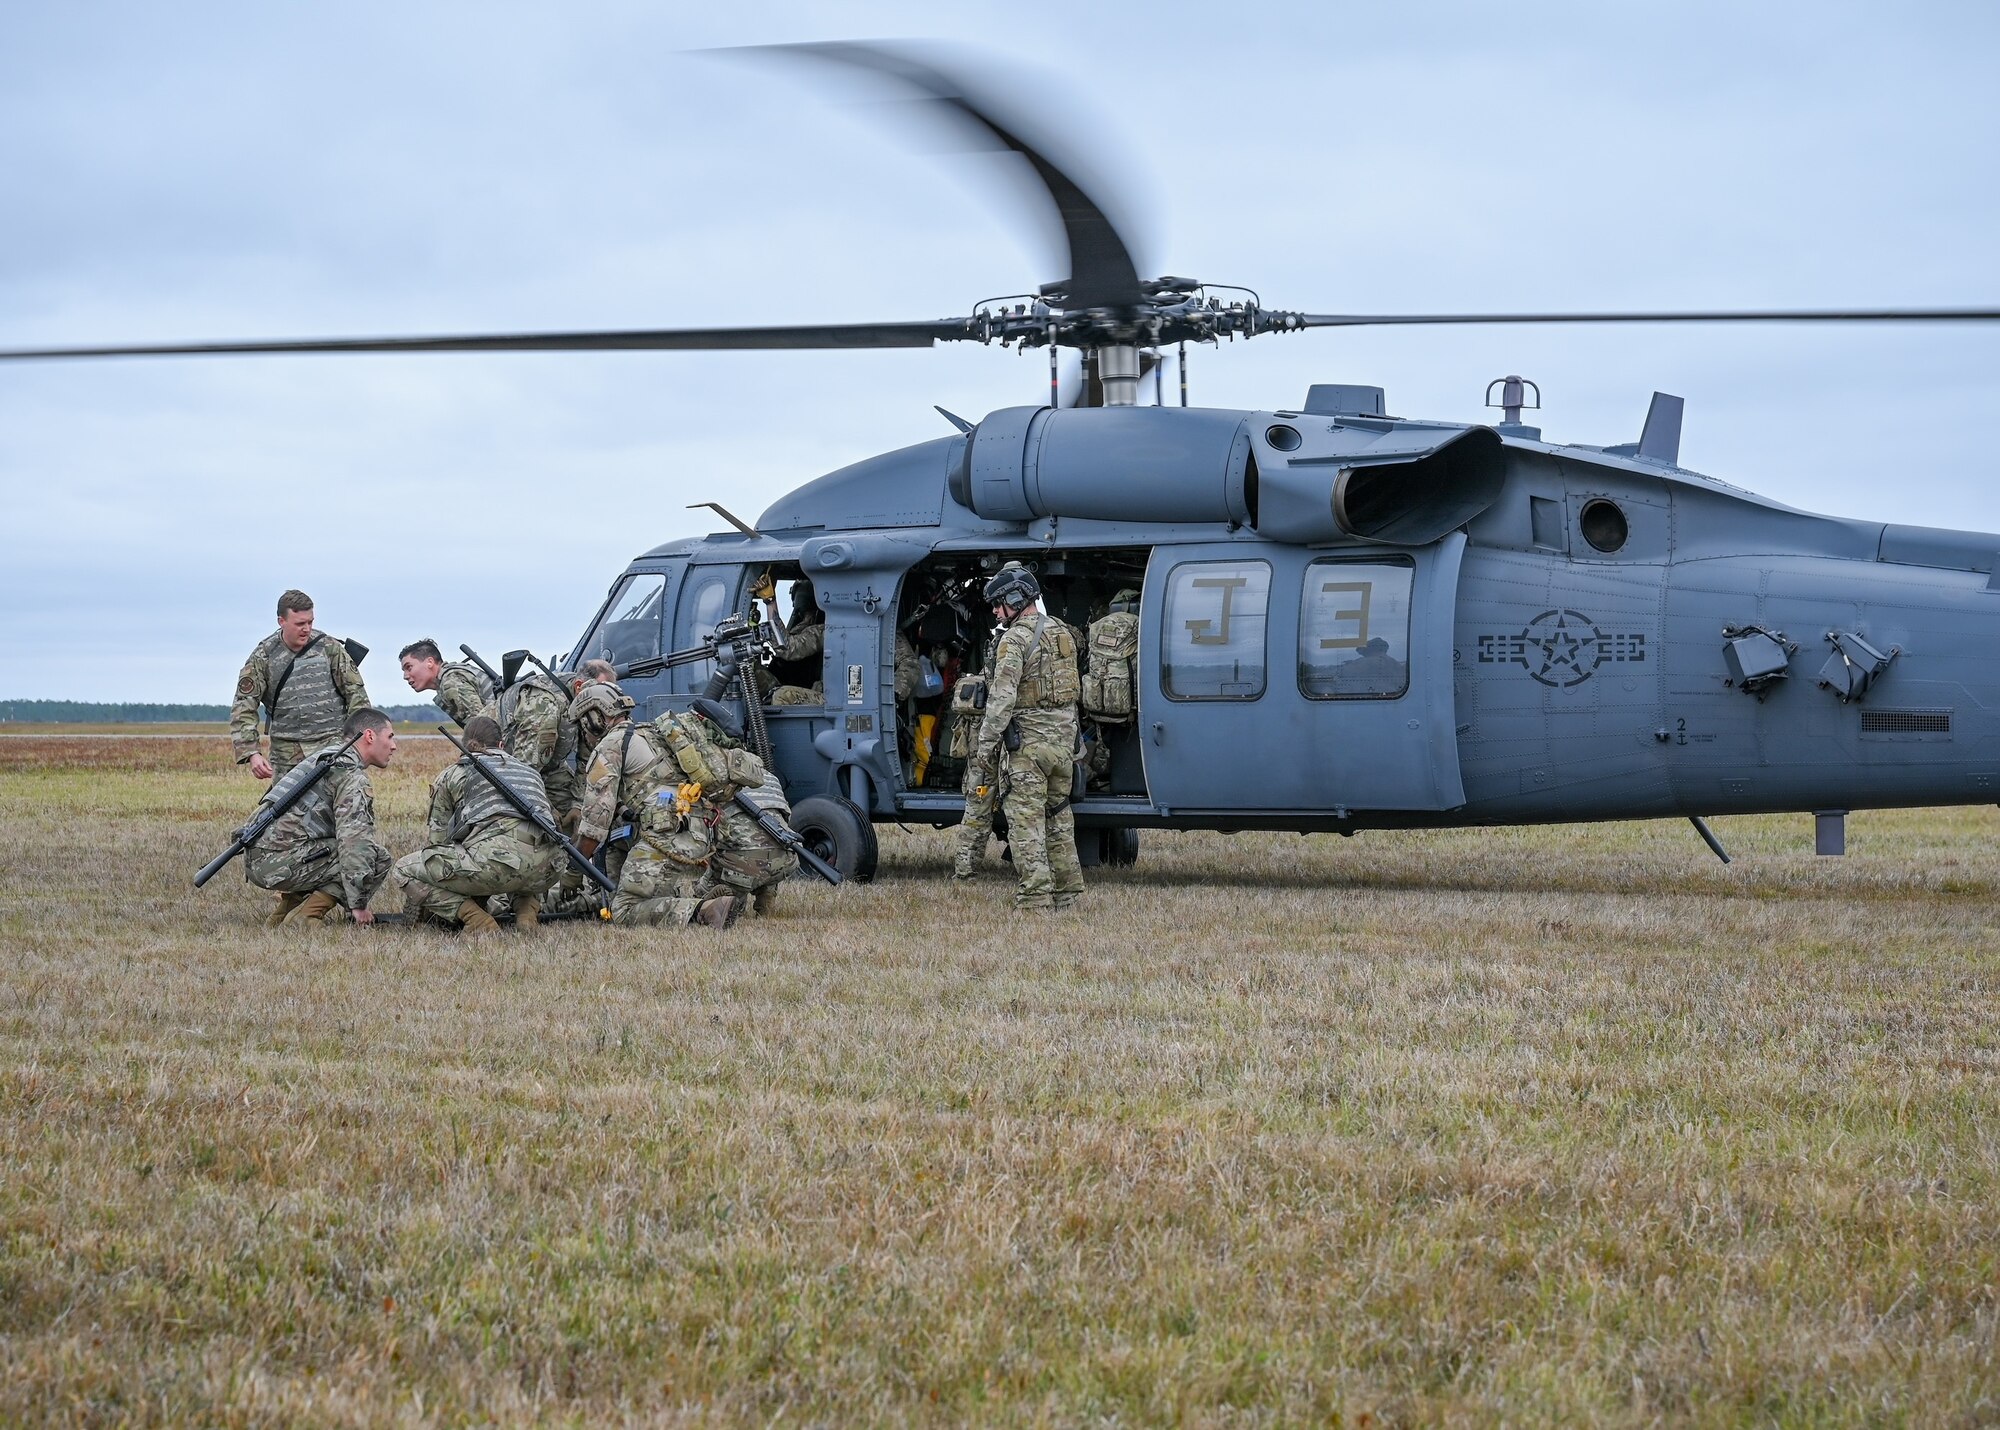 Airmen from the 920th Rescue Wing prepare to move a litter onto an HH-60 Pave Hawk helicopter during the wing’s FURY HORIZON 22 exercise Feb. 5, 2022. The HORIZON series of wing exercises are held throughout the year at group and wing levels. They bring together the combined knowledge of the entire wing to focus tactics on executing their mission anywhere in the world at a moment’s notice. (U.S. Air Force photo by Capt. Amanda Ling)